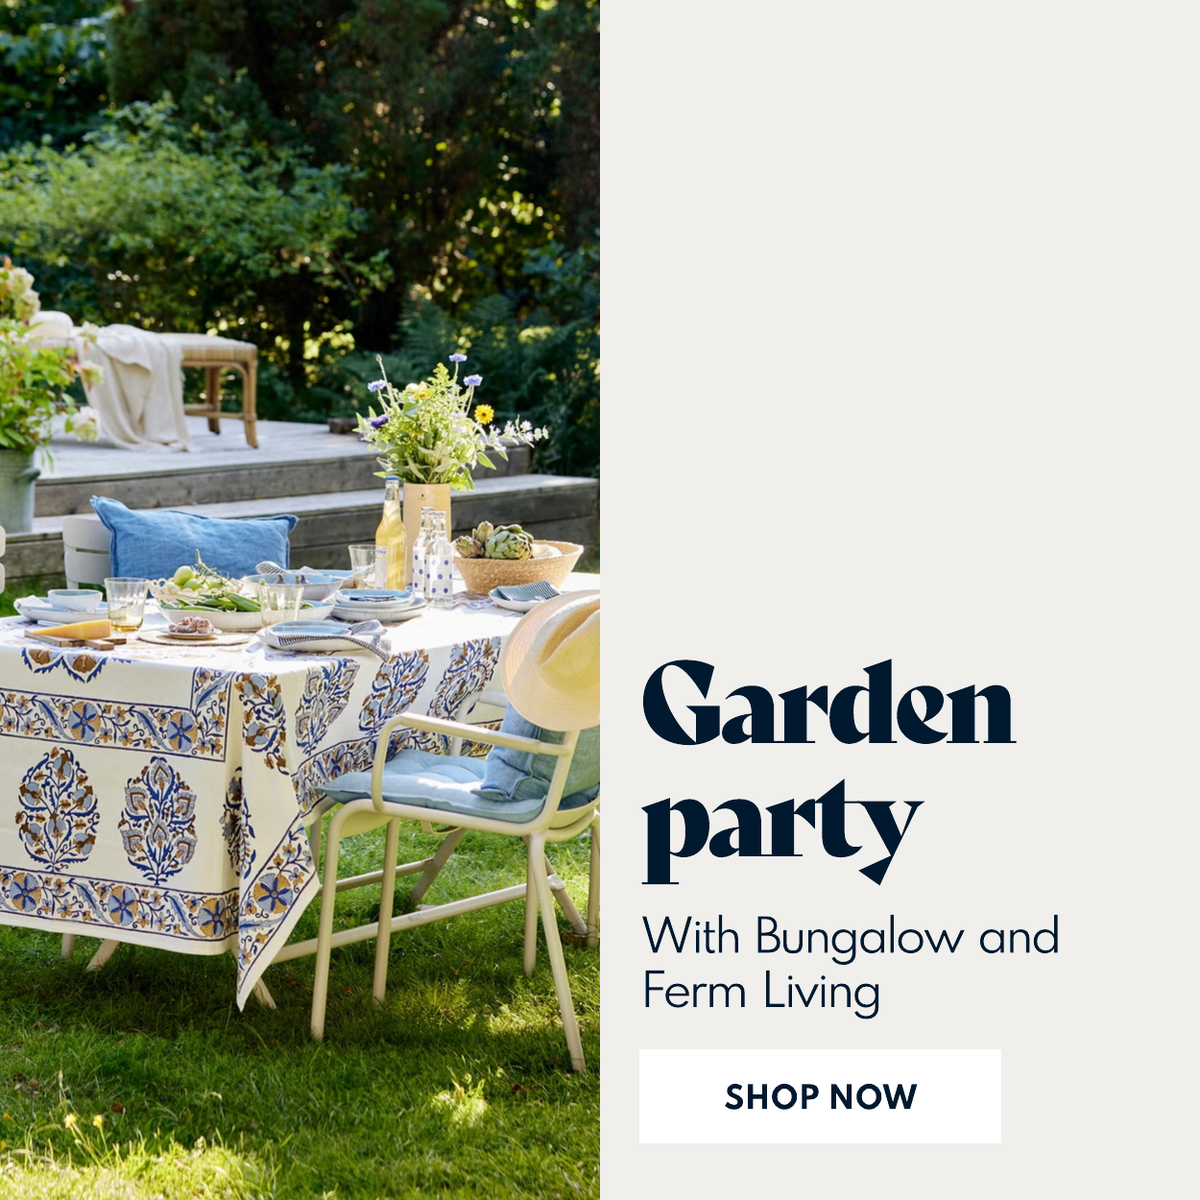 Garden Party with Bungalow and Ferm Living. Shop Now.